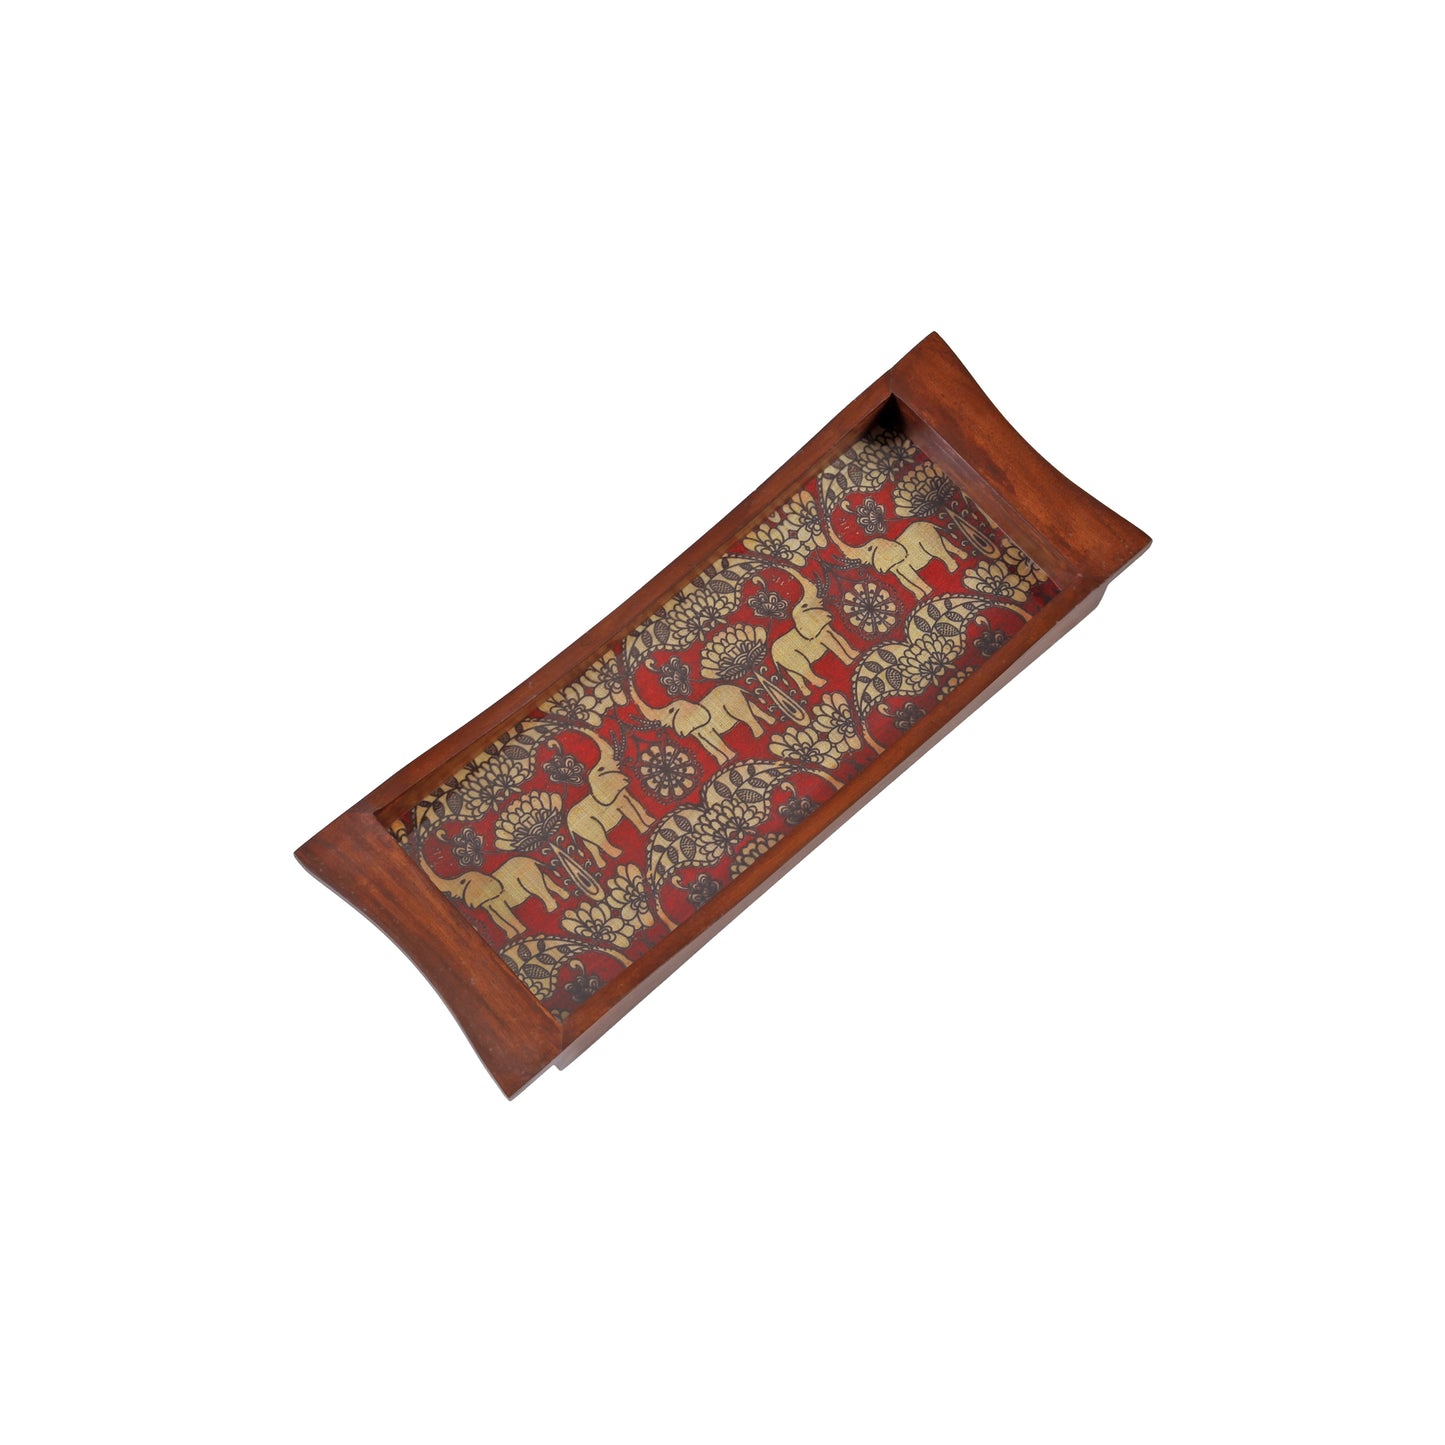 A Tiny Mistake Elephant Pattern on Maroon Base Boat Shaped Teak Serving Tray, Tray for Serving Tea and Snacks, 35 x 15 x 4 cm